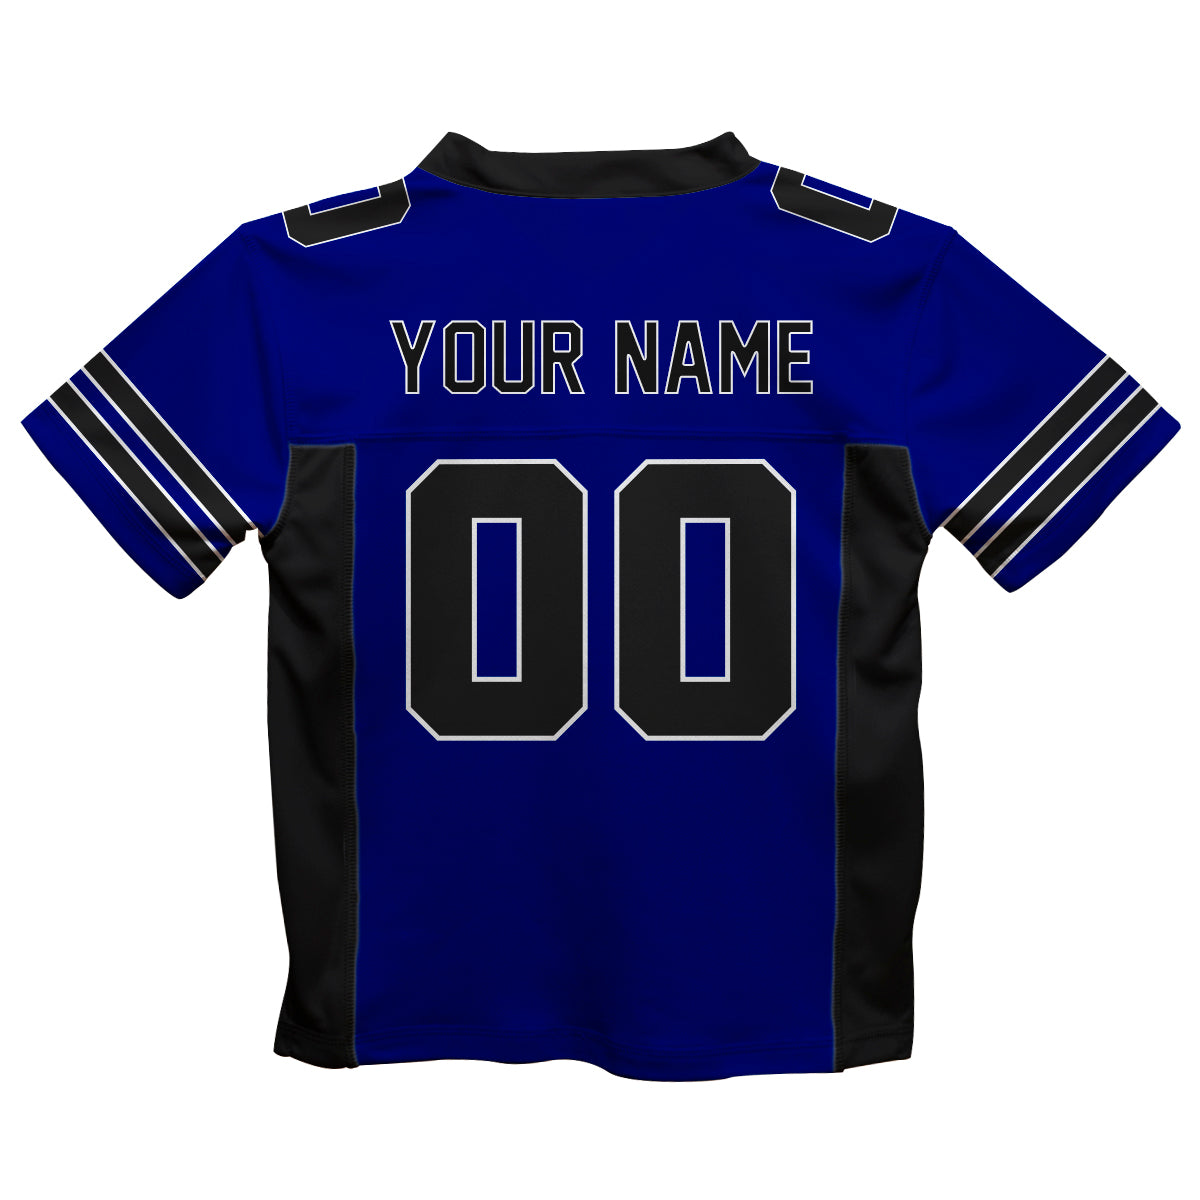 Personalized Name and Number Green and Black Fashion Football T-Shirt - Wimziy&Co.